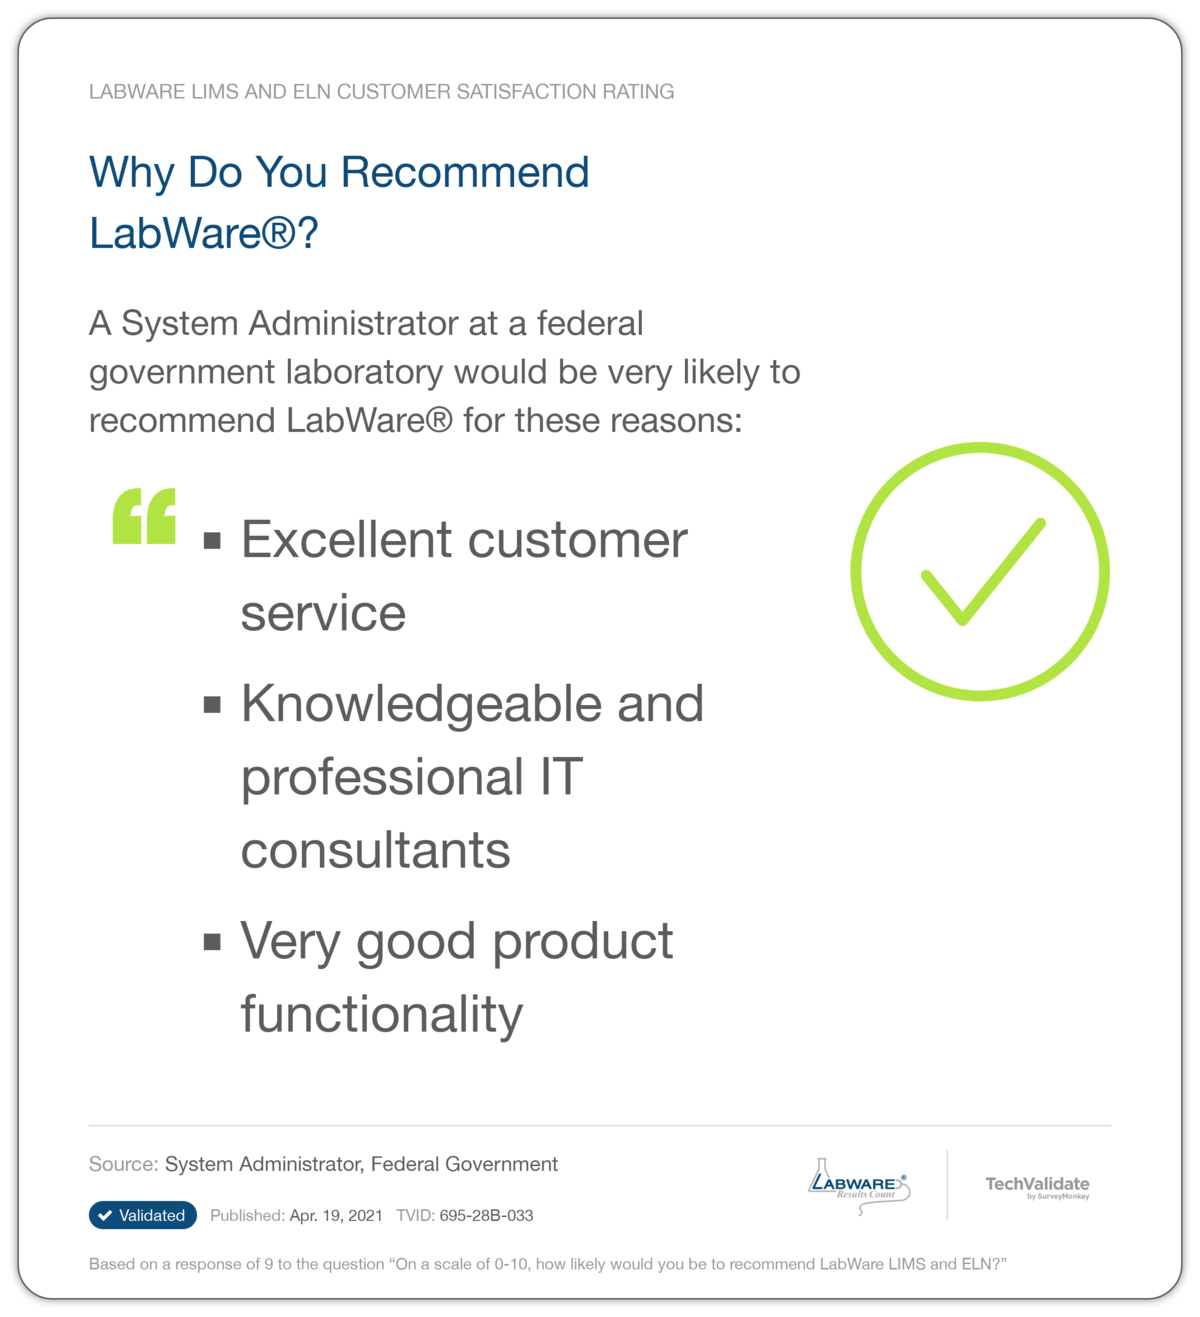 Why Do You Recommend LabWare®?